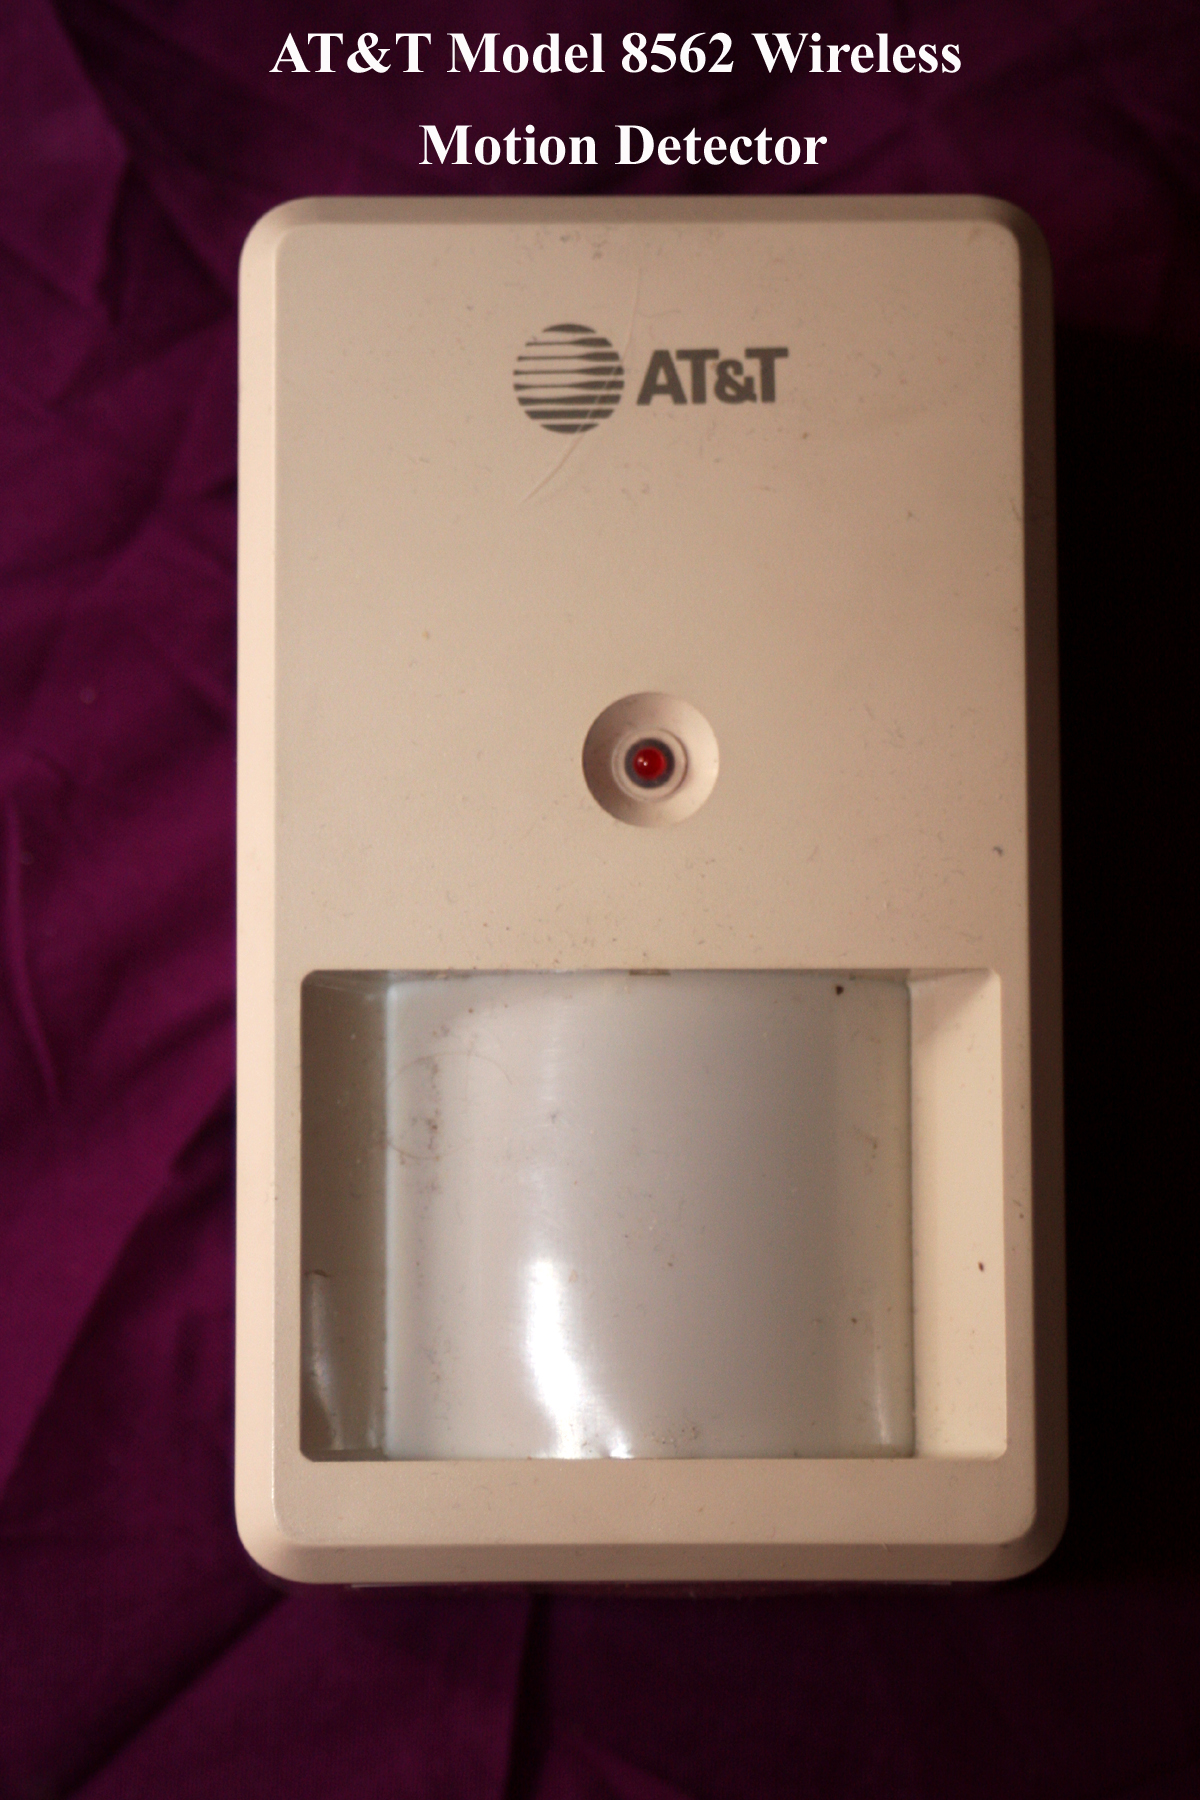 AT&T Home Security System - Model 8562 Motion Detector